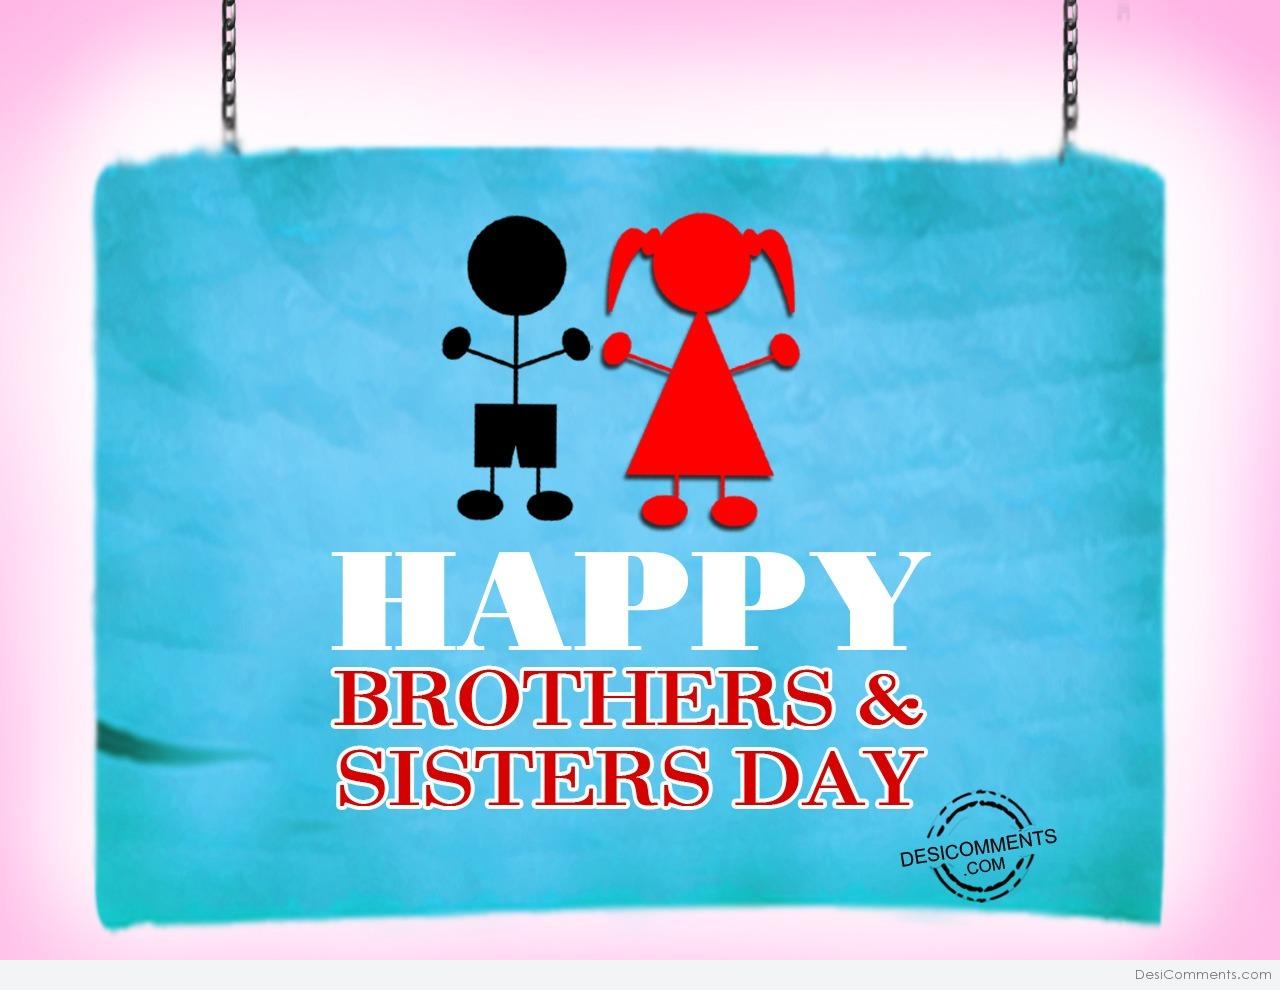 Brothers And Sisters Day Pictures, Images, Graphics for Facebook, Whatsapp